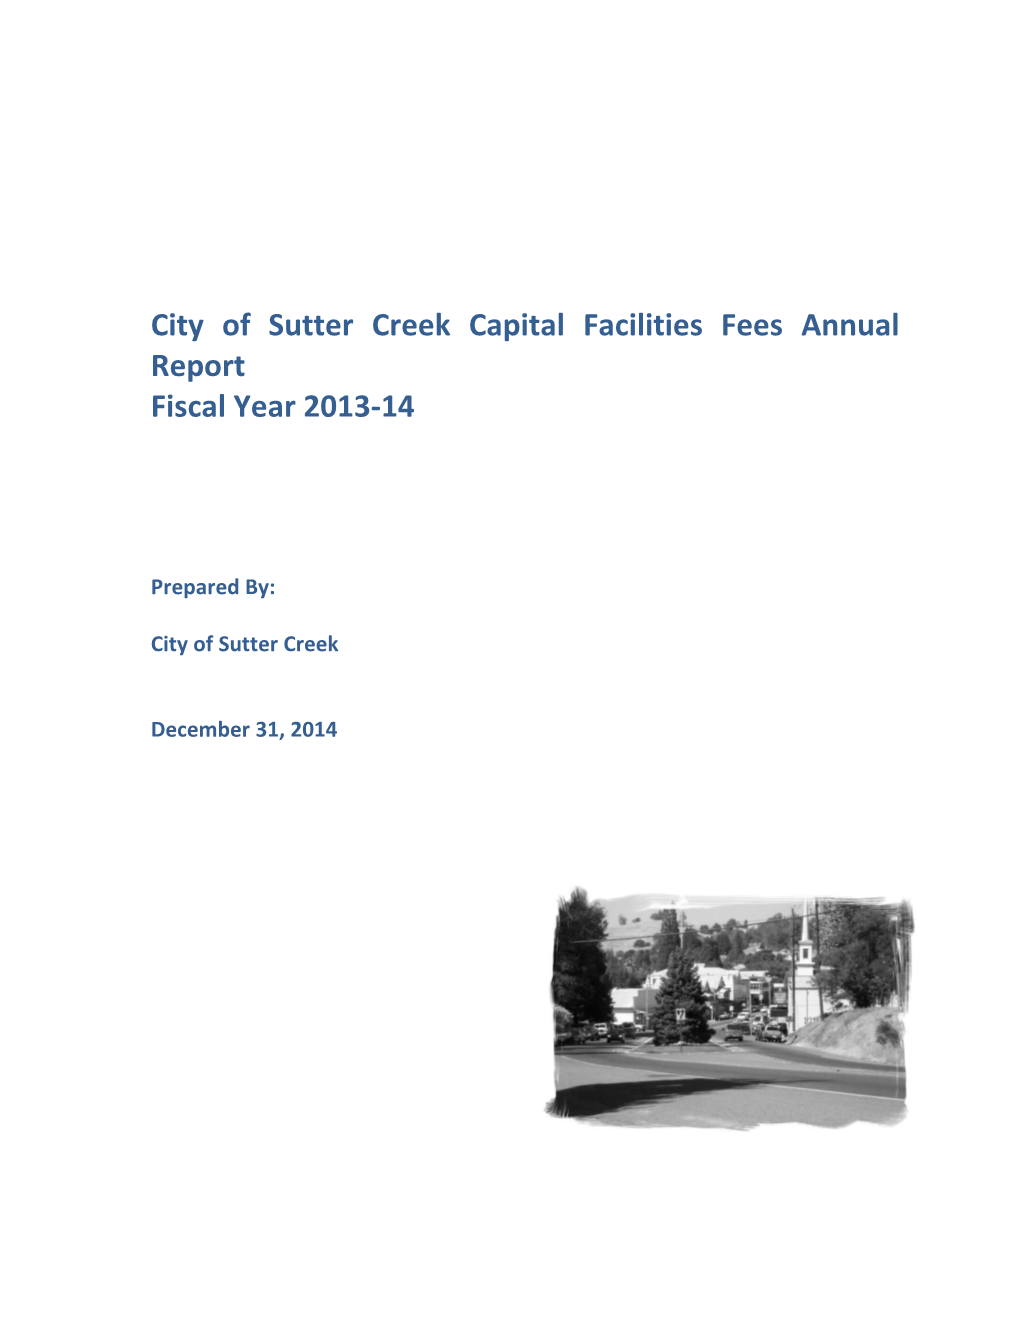 City of Sutter Creek Capital Facilities Fees Annual Report